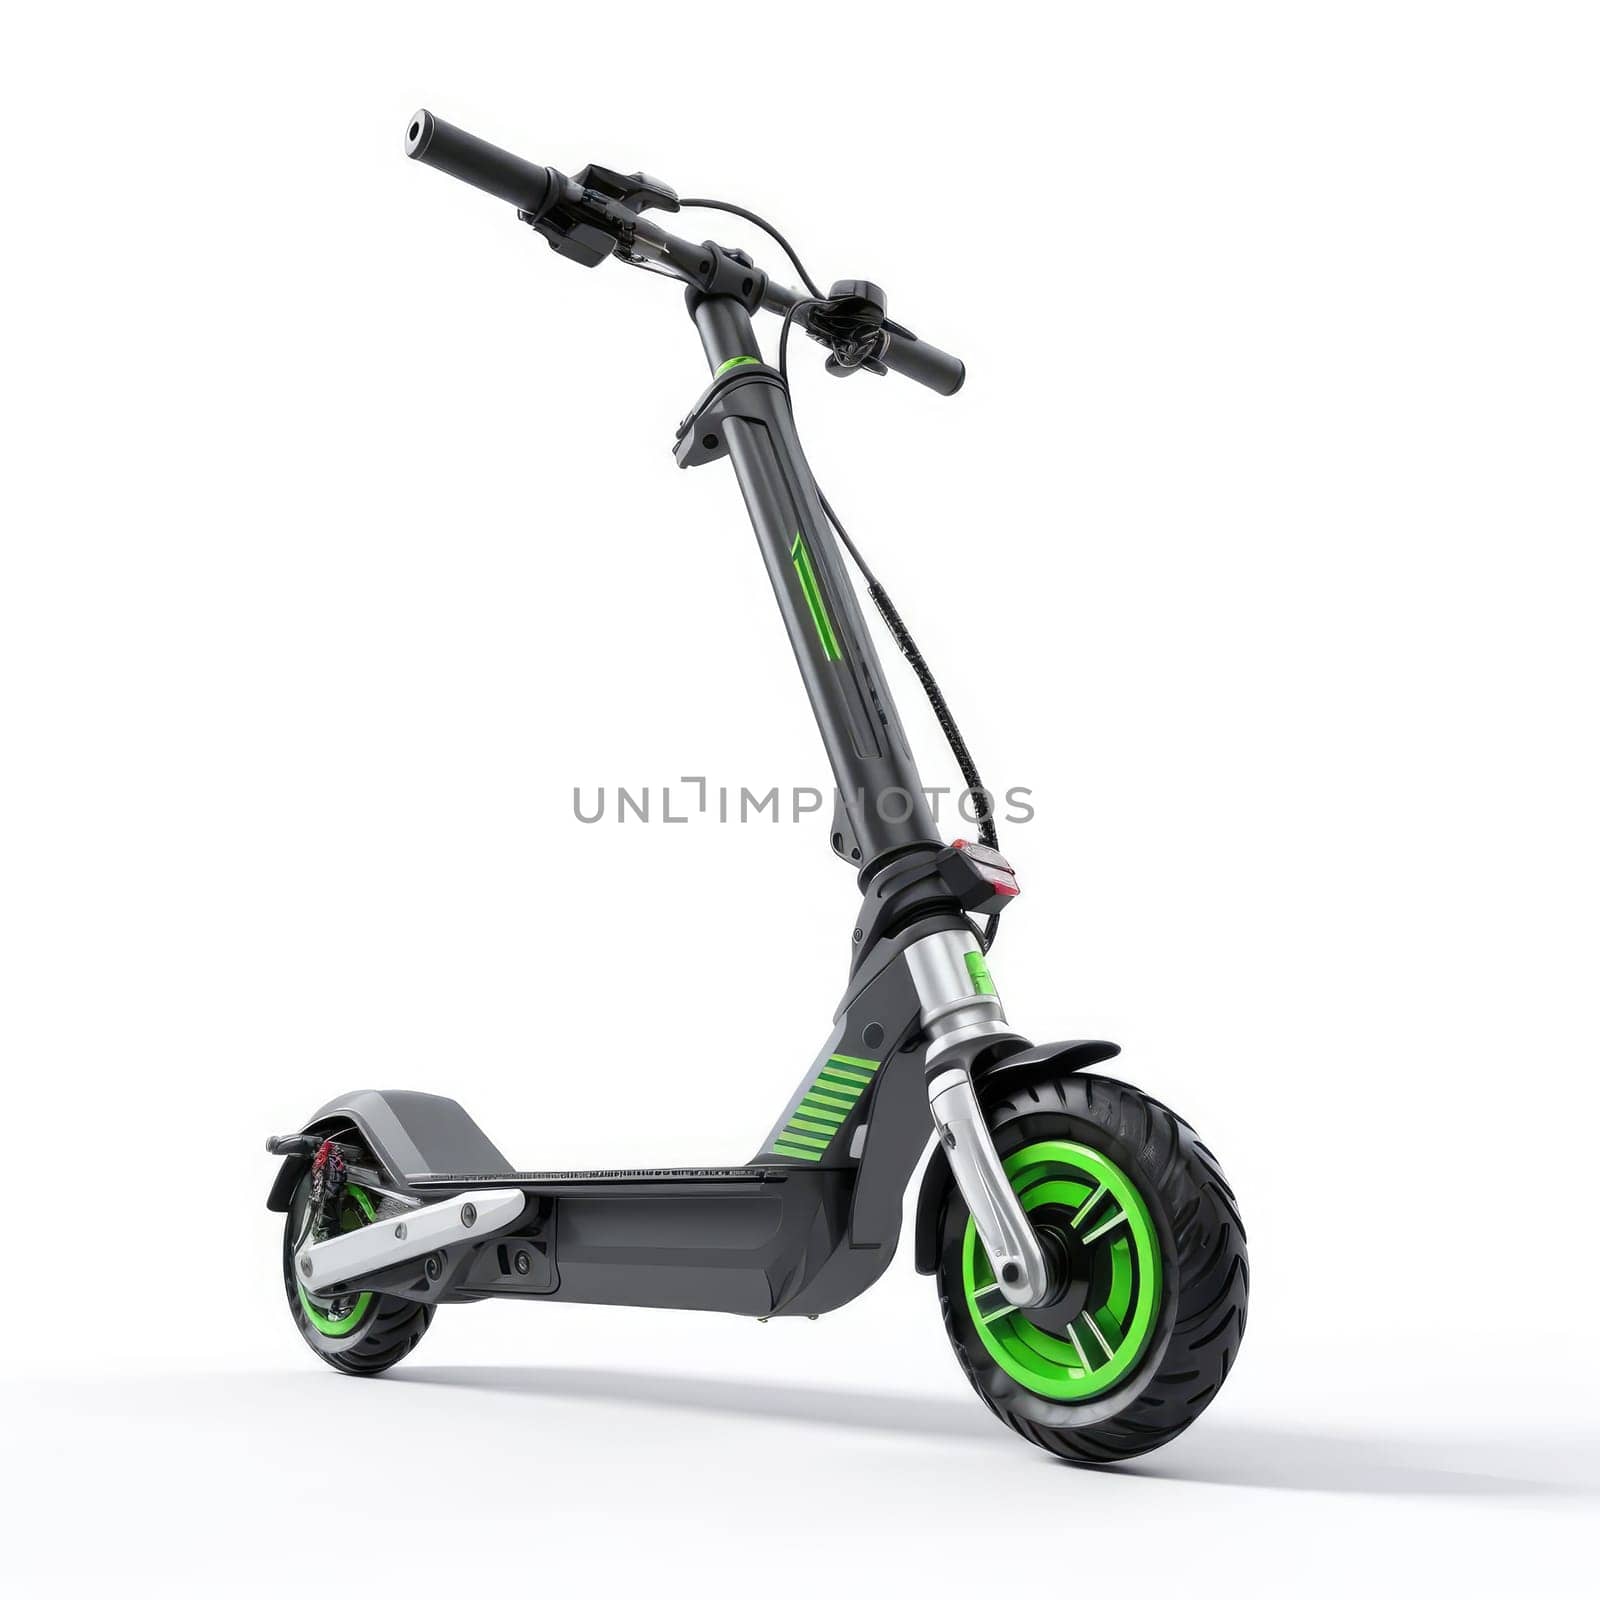 The electric scooter of the future by cherezoff